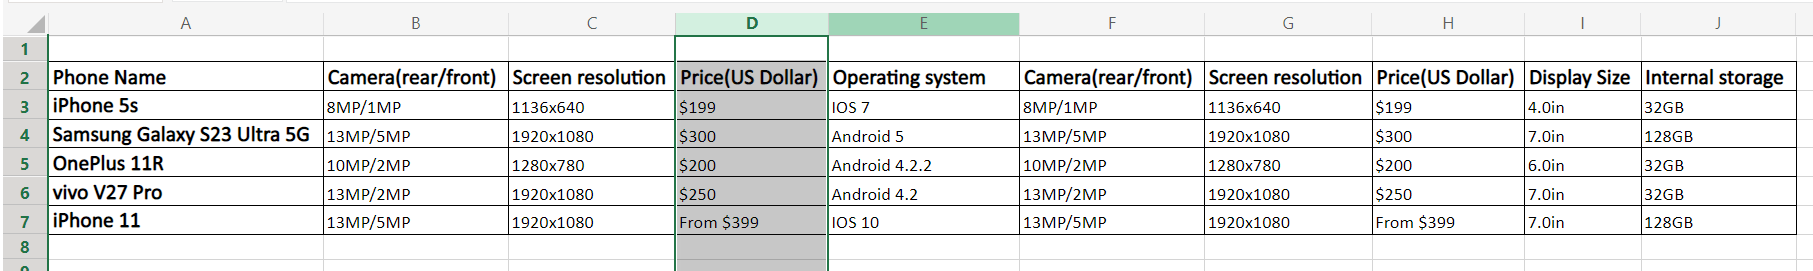 How to swap columns in Excel: Dragging and other methods to move columns